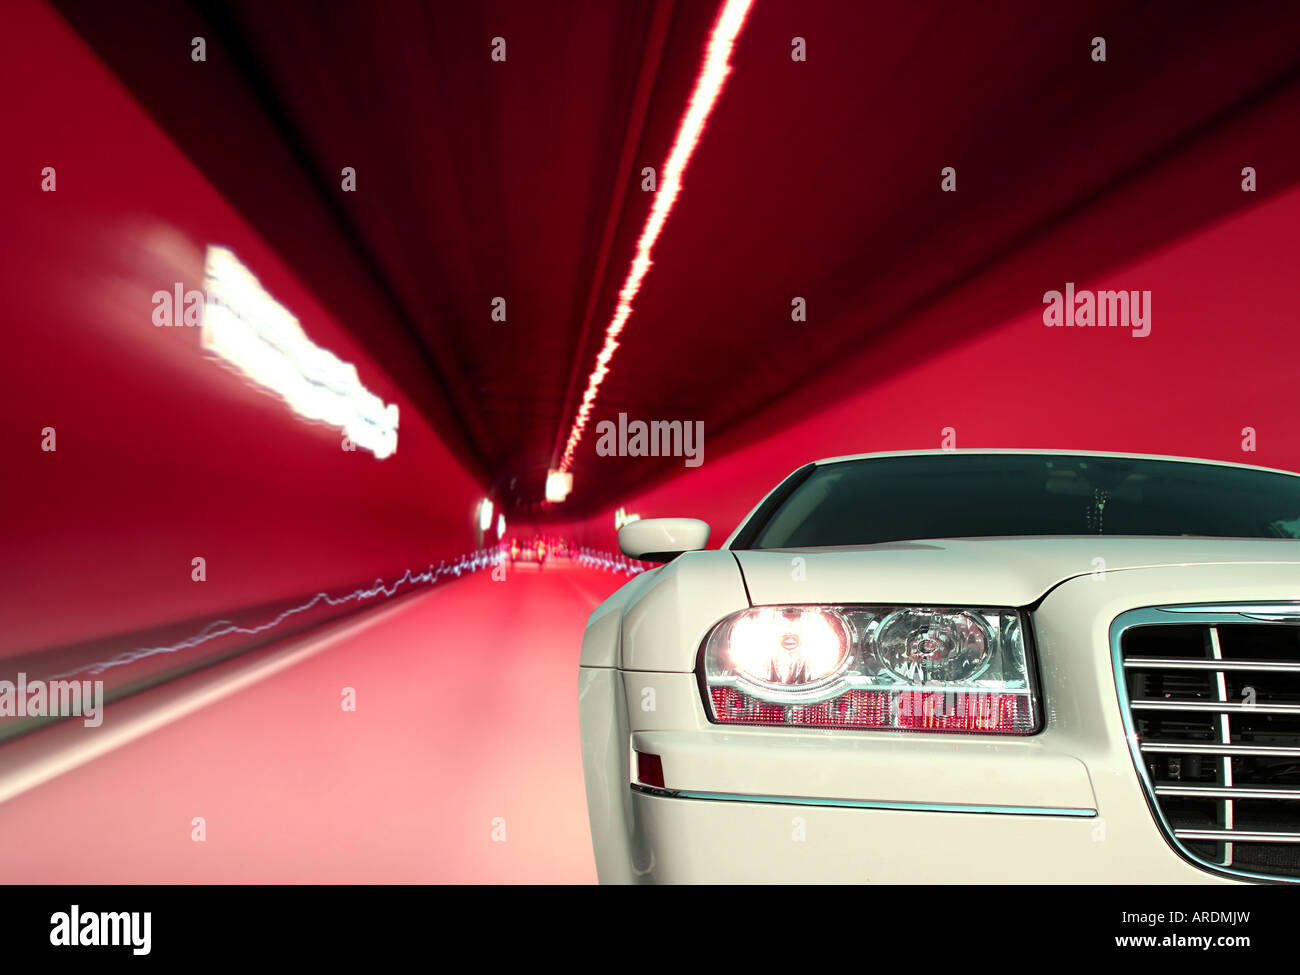 Close-up image of a luxury car in a tunnel Stock Photo